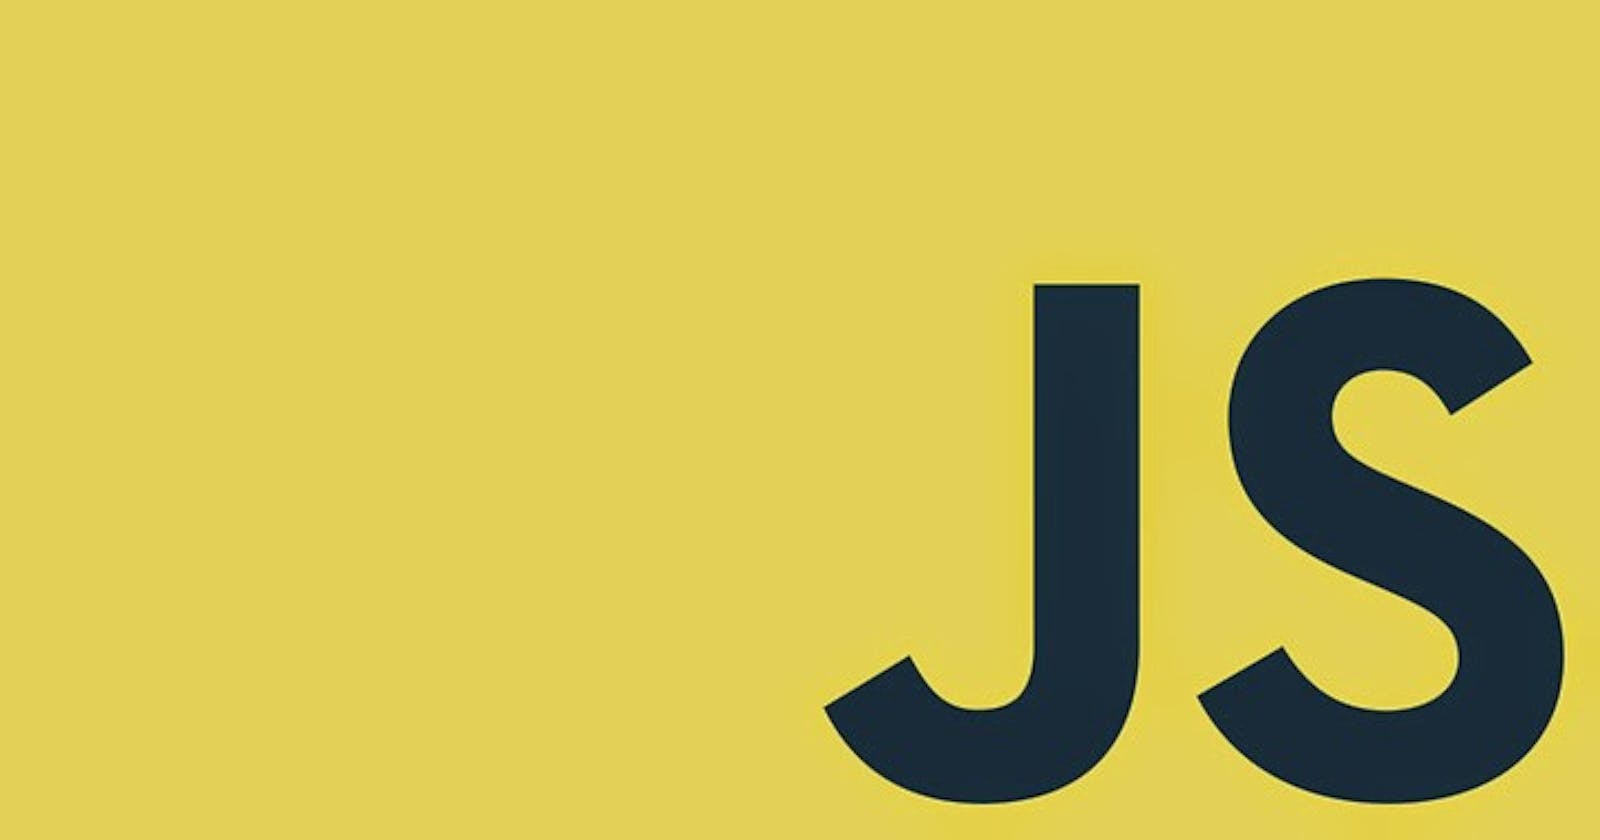 Object-Oriented JavaScript: Objects and their property types